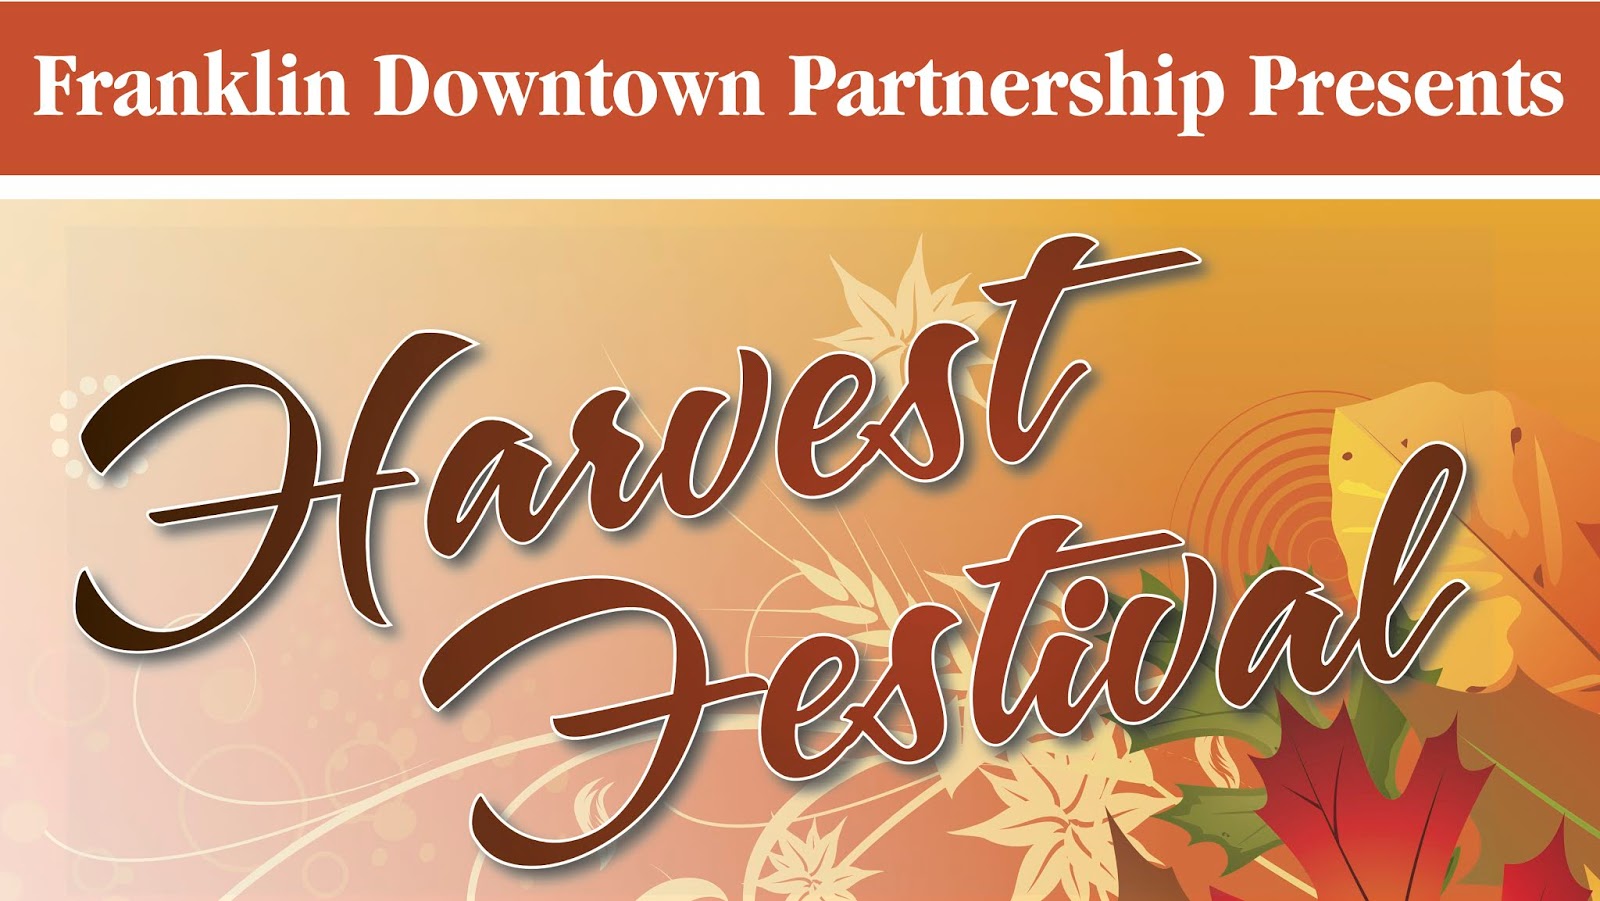 Franklin Downtown Partnership Join Us at the Harvest Festival October 13!